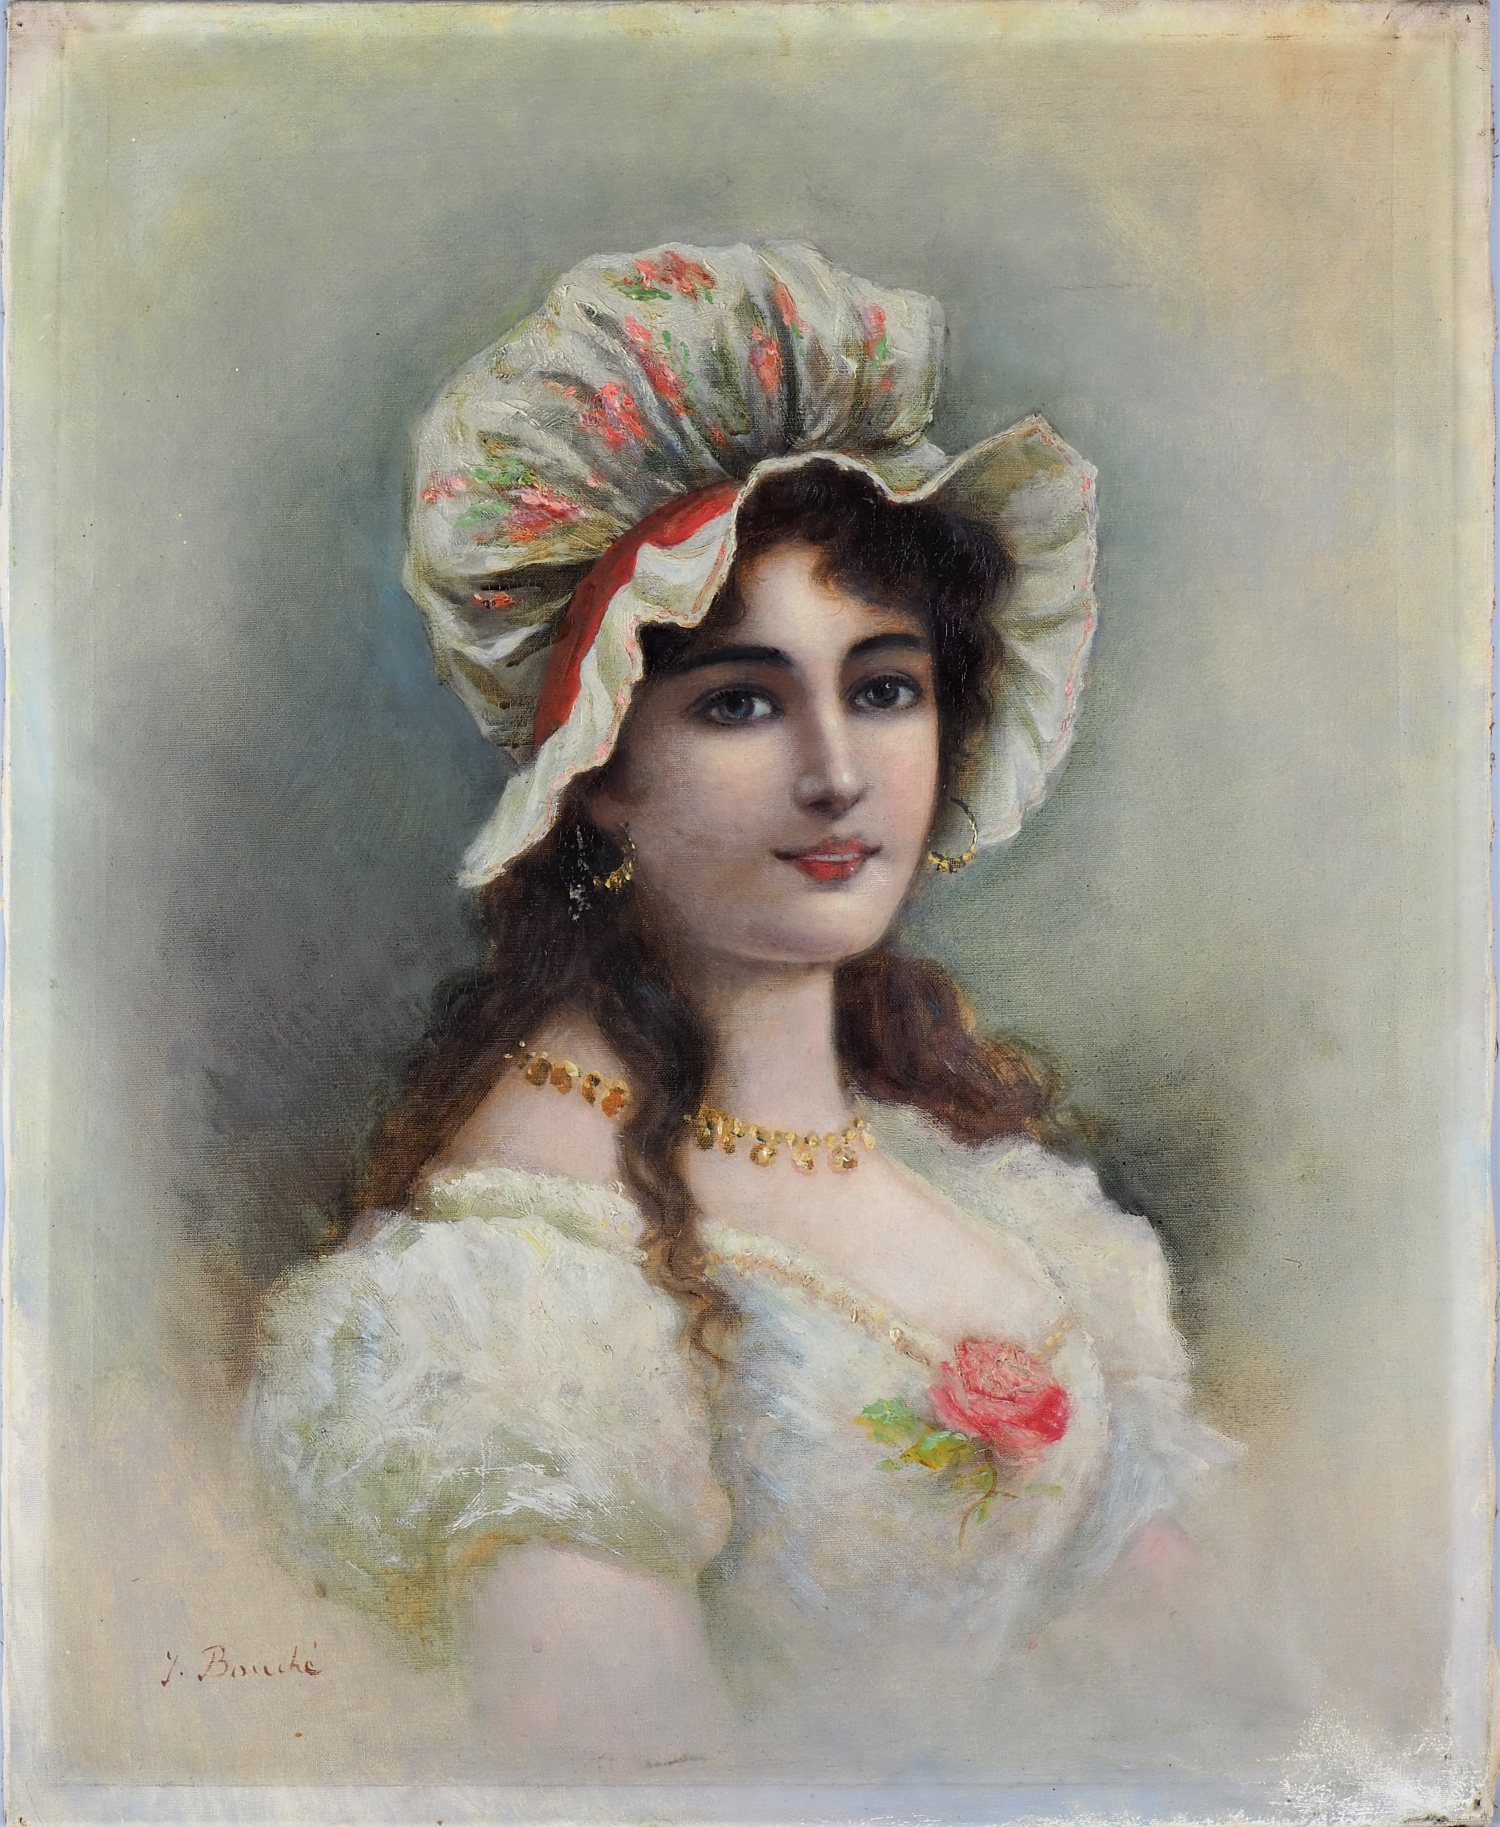 Portrait of a lady at the end of the 19th century - signed. "J. Bouché"